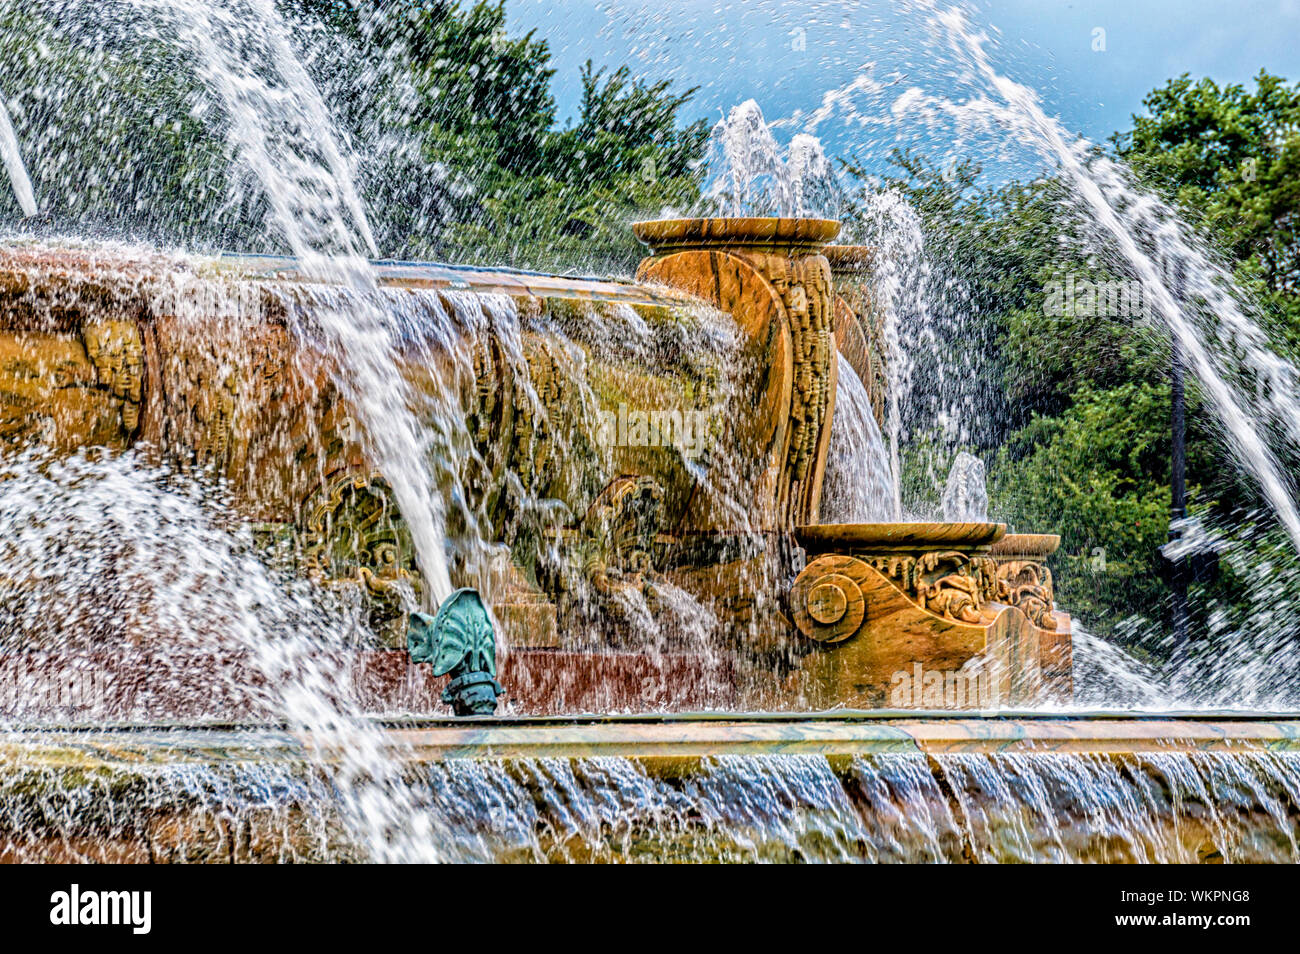 Water is spraying from Buckingham Fountain in Grant Park. Streets of Chicago. Stock Photo